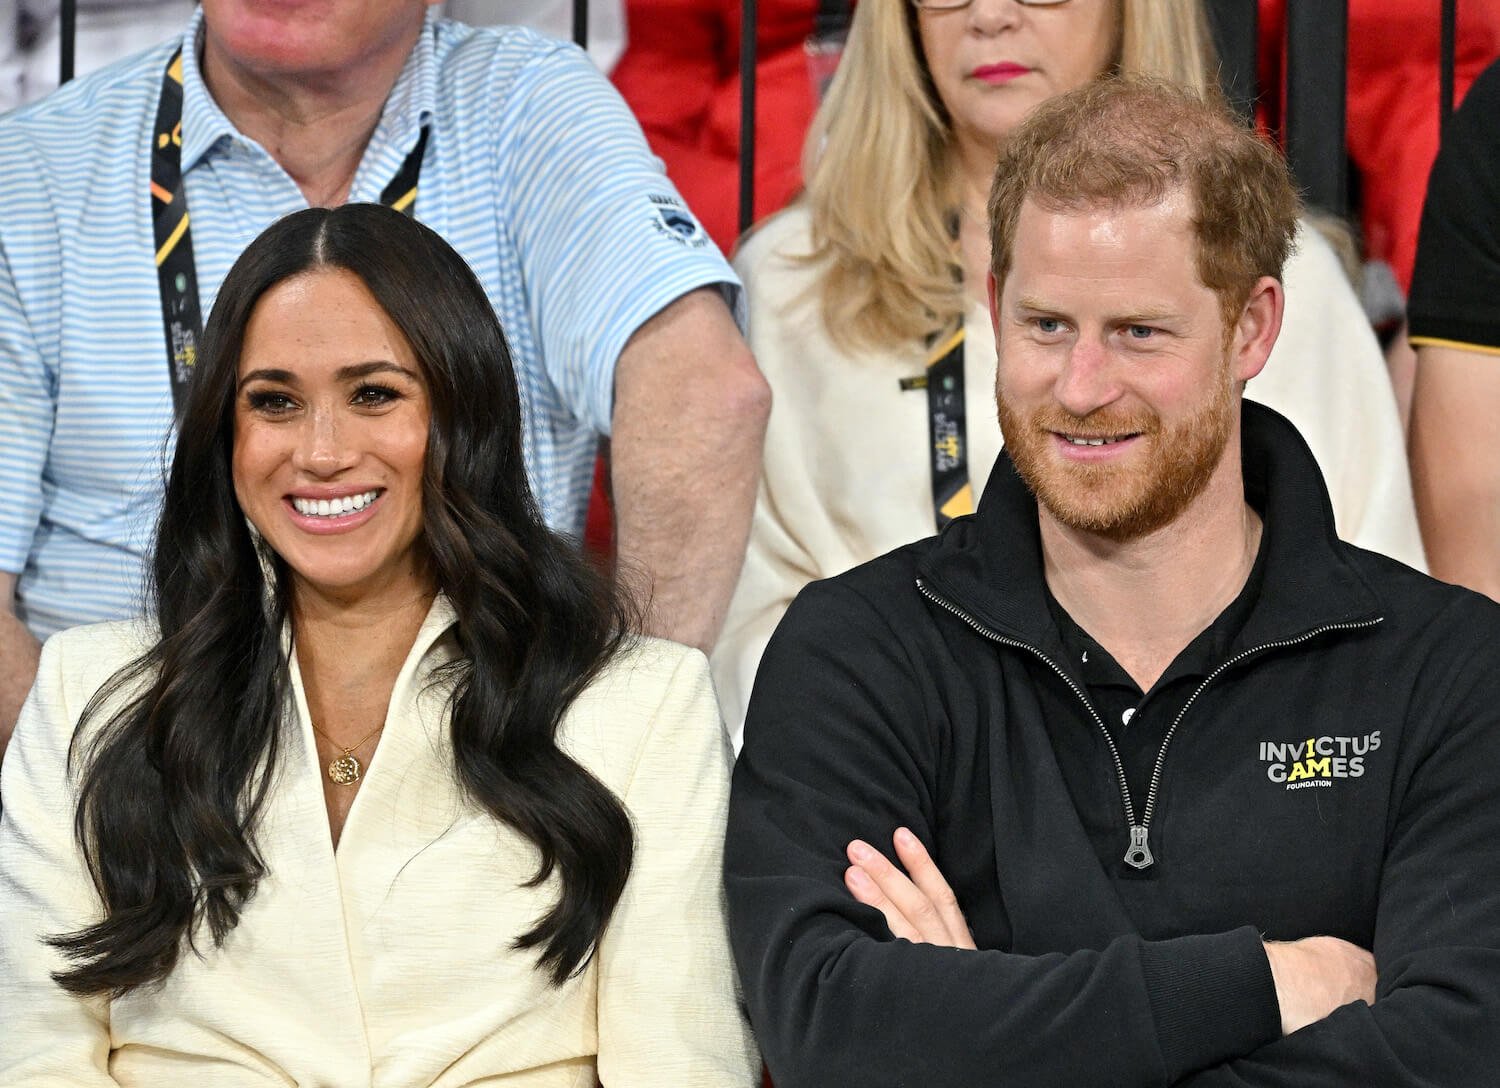 Meghan Markle wears whites and smiles while sitting next to smiling Prince Harry wearing a black top and crossing his arms